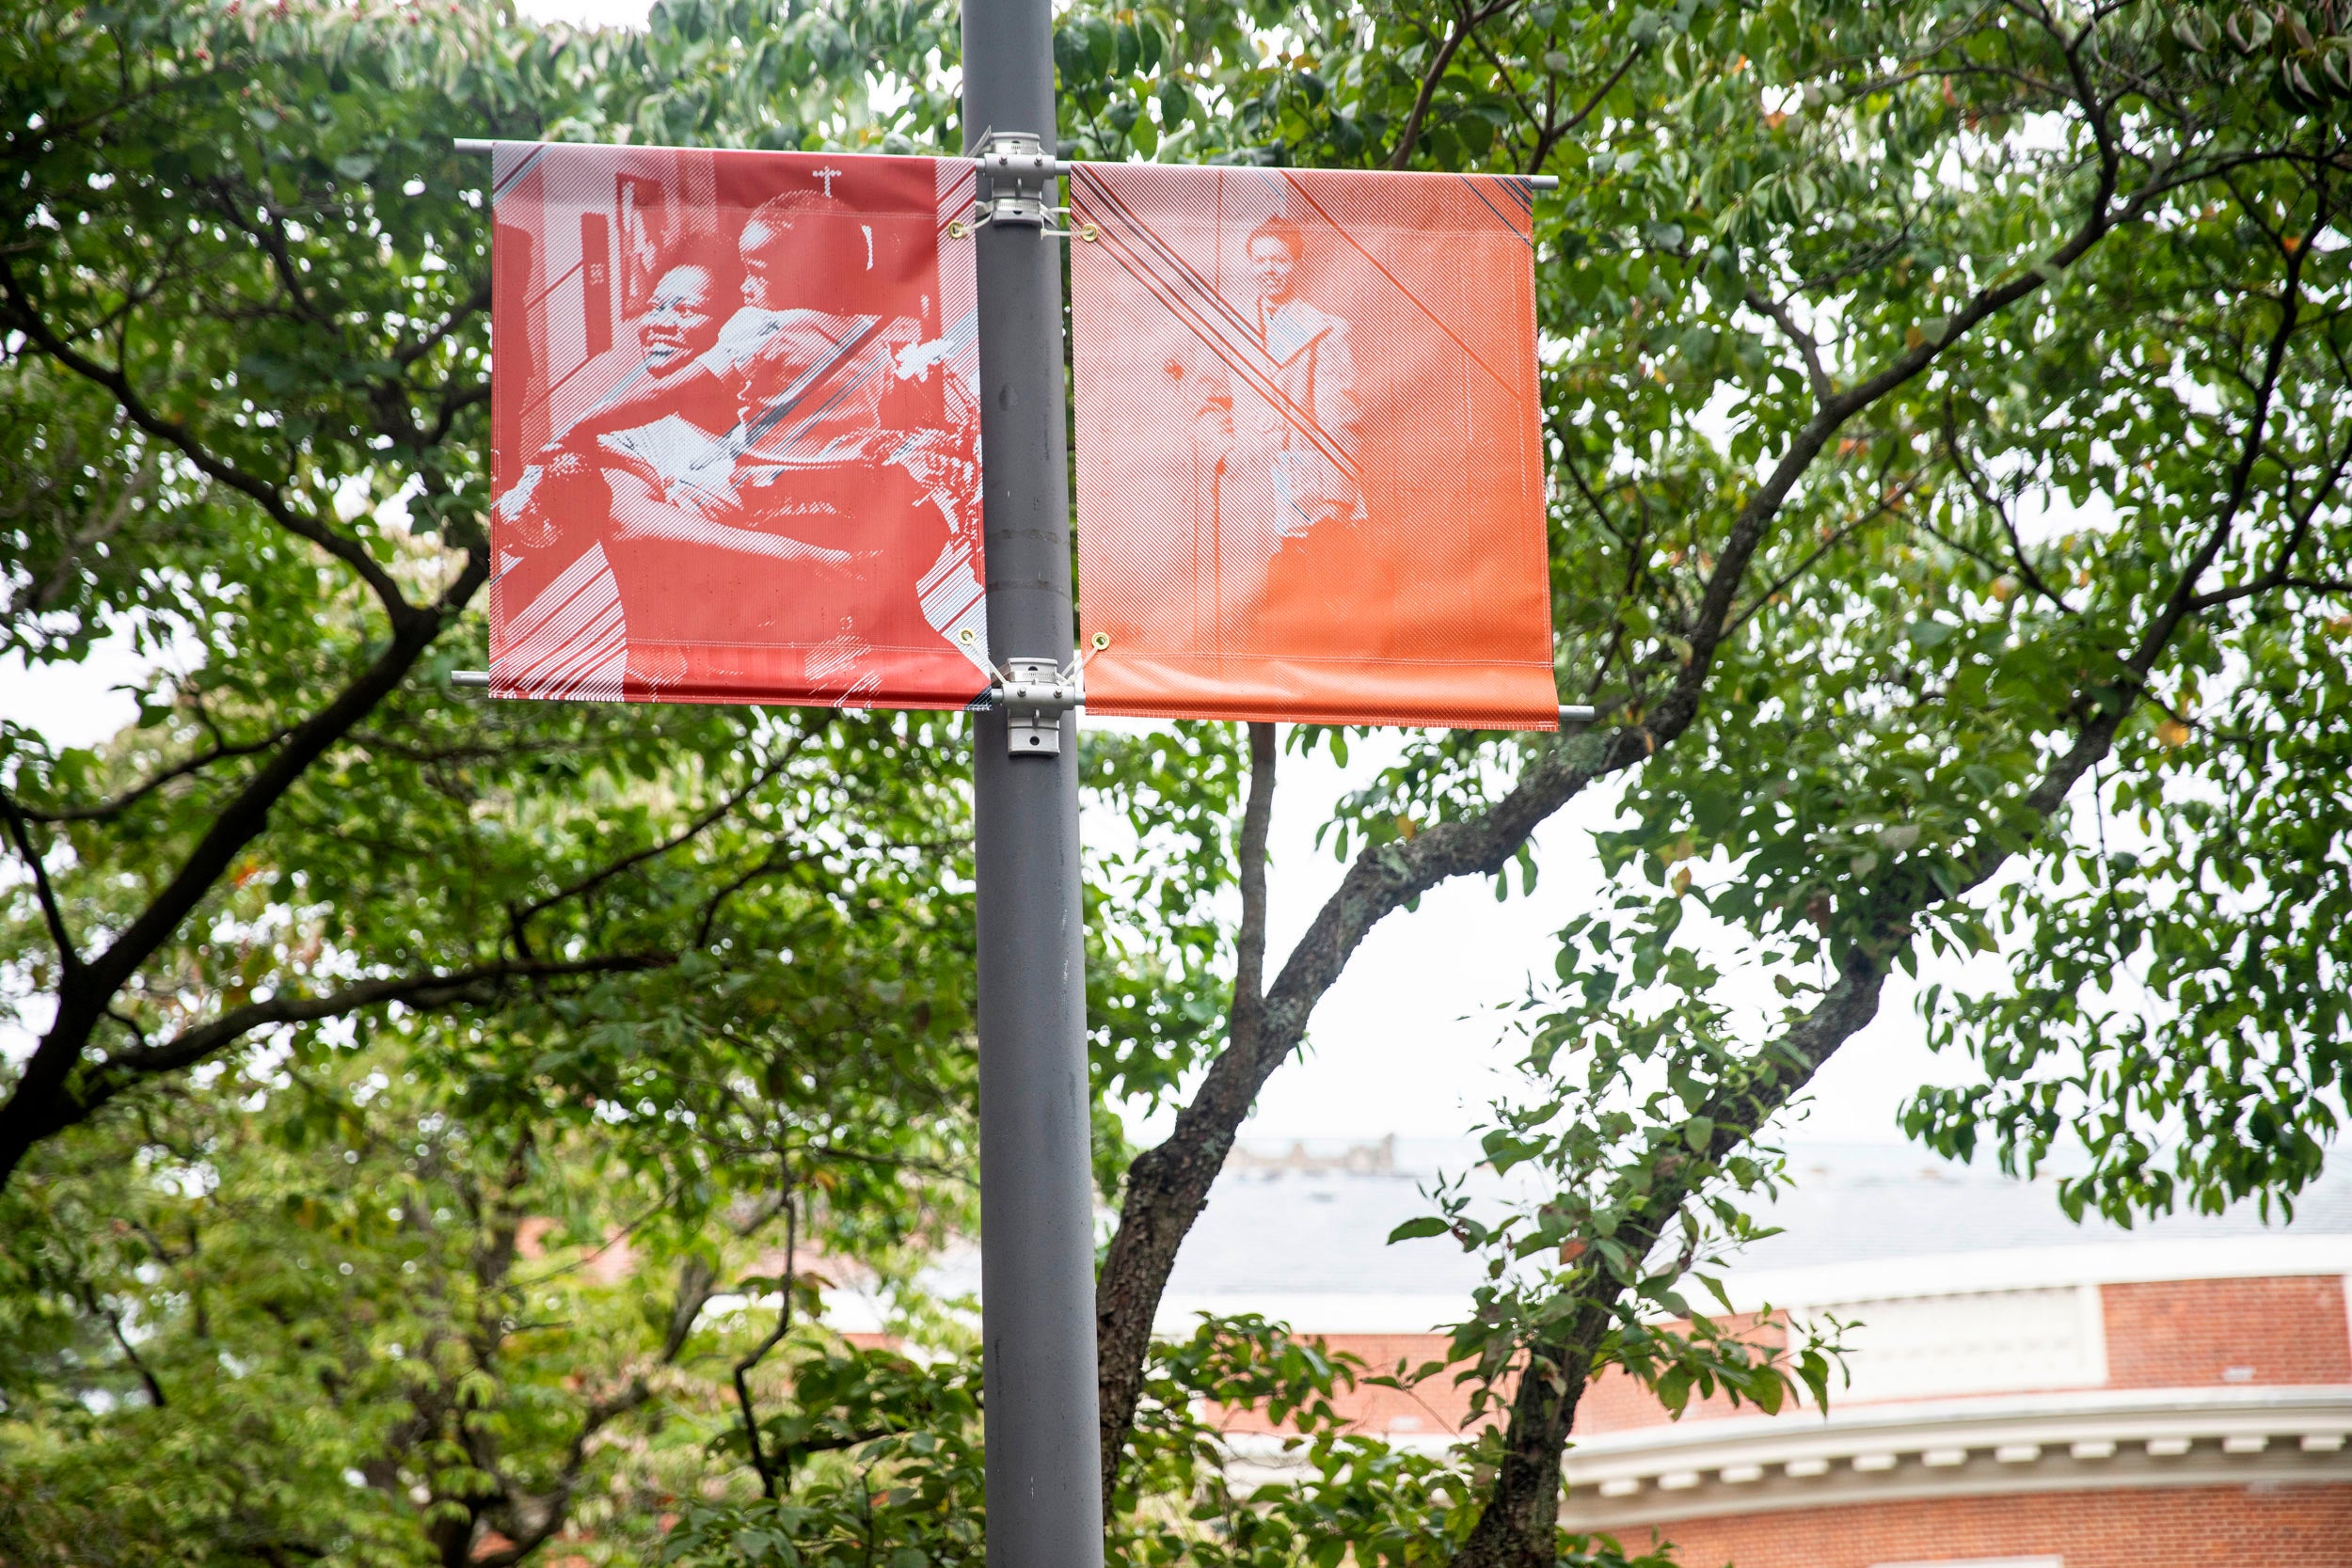 Visual artist Tomashi Jackson animates the Yard with vibrant banners that depict Civil Rights activists Ruth Batson and Pauli Murray.